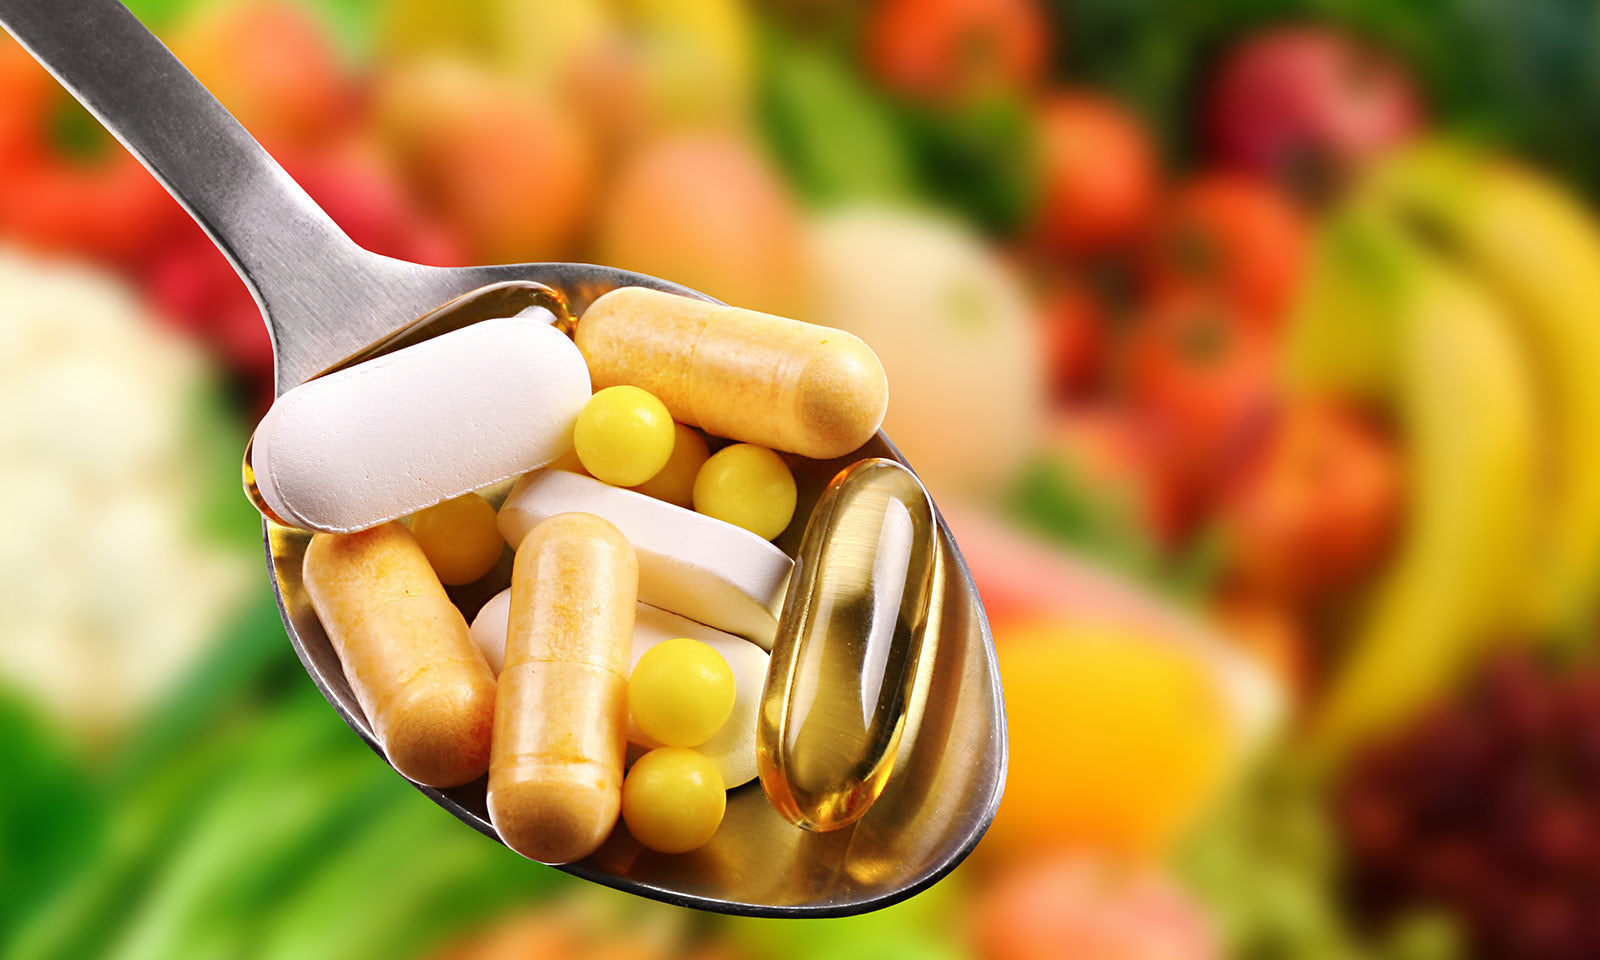 Crucial Things to Look For When Choosing a Supplement Company